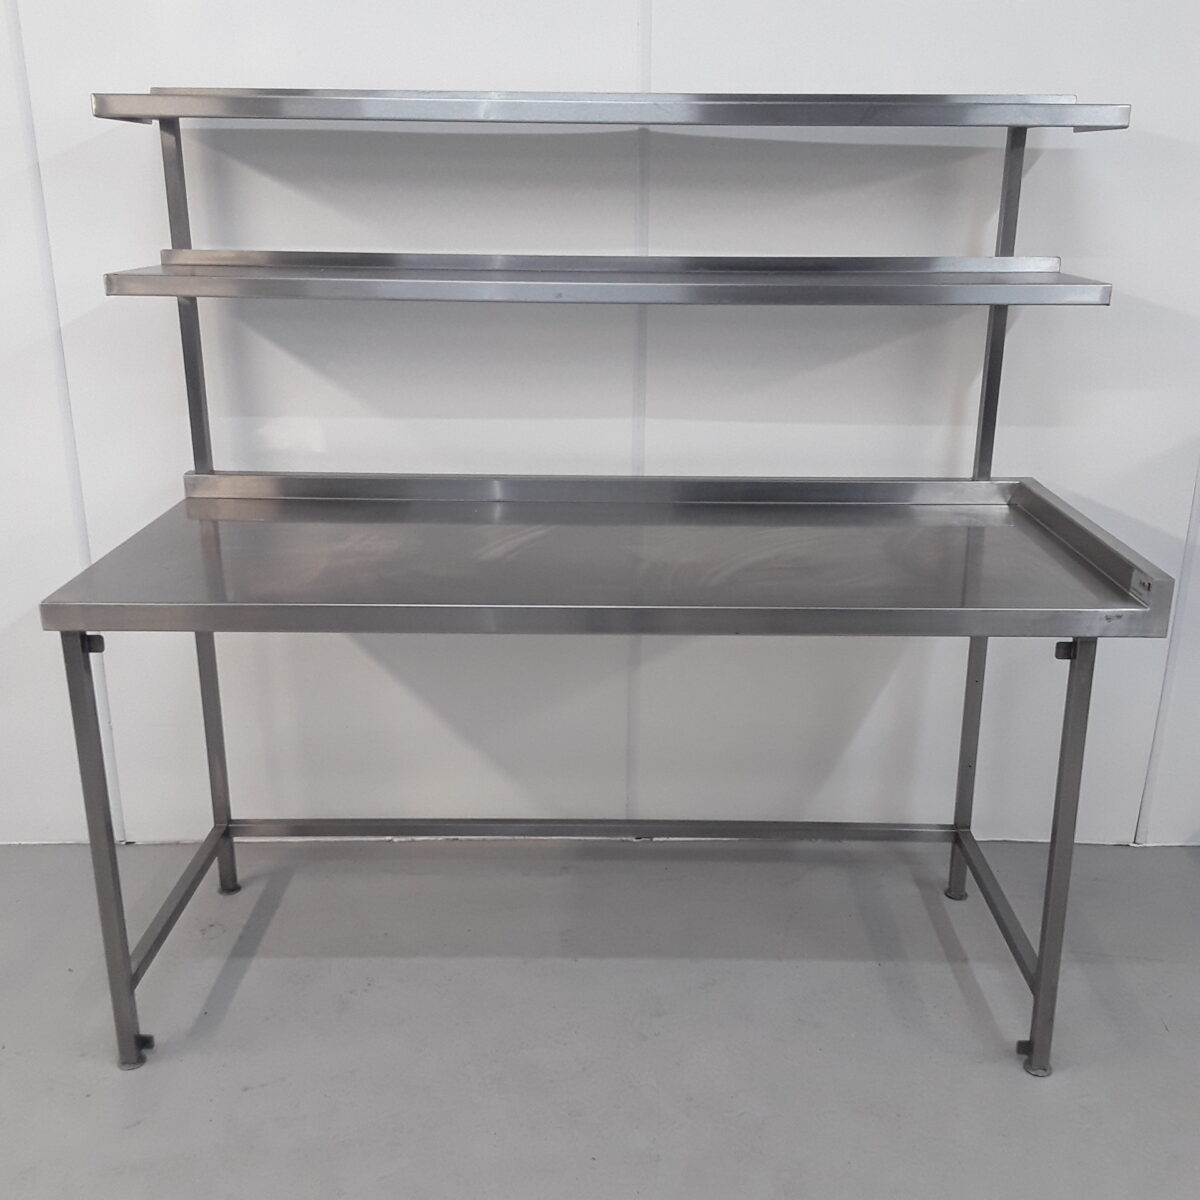 Used   Stainless Steel Table 180cmW x 75cmD x 90cmH